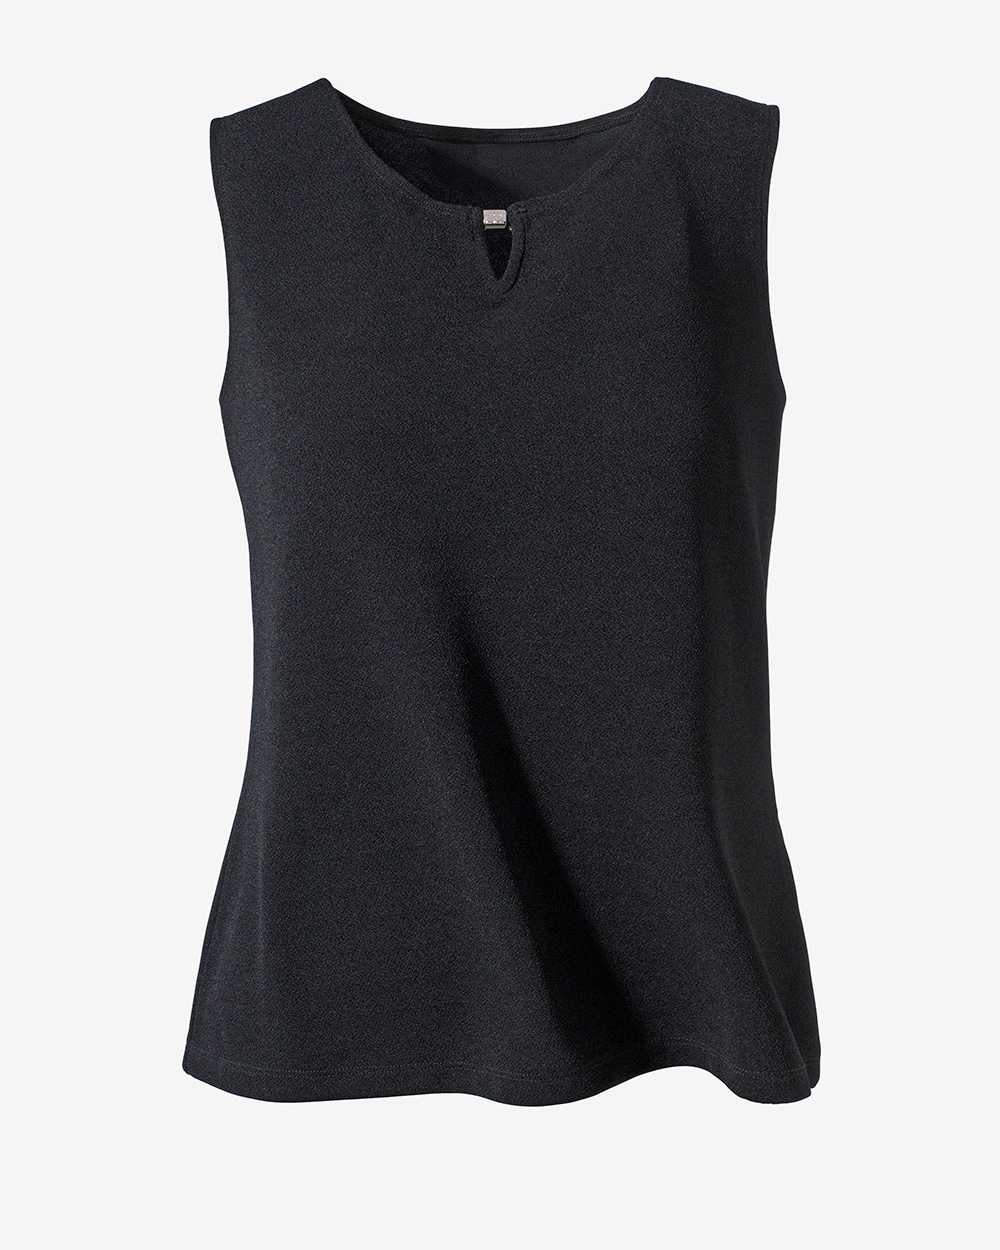 Easywear Etched Bar Keyhole Tank Top